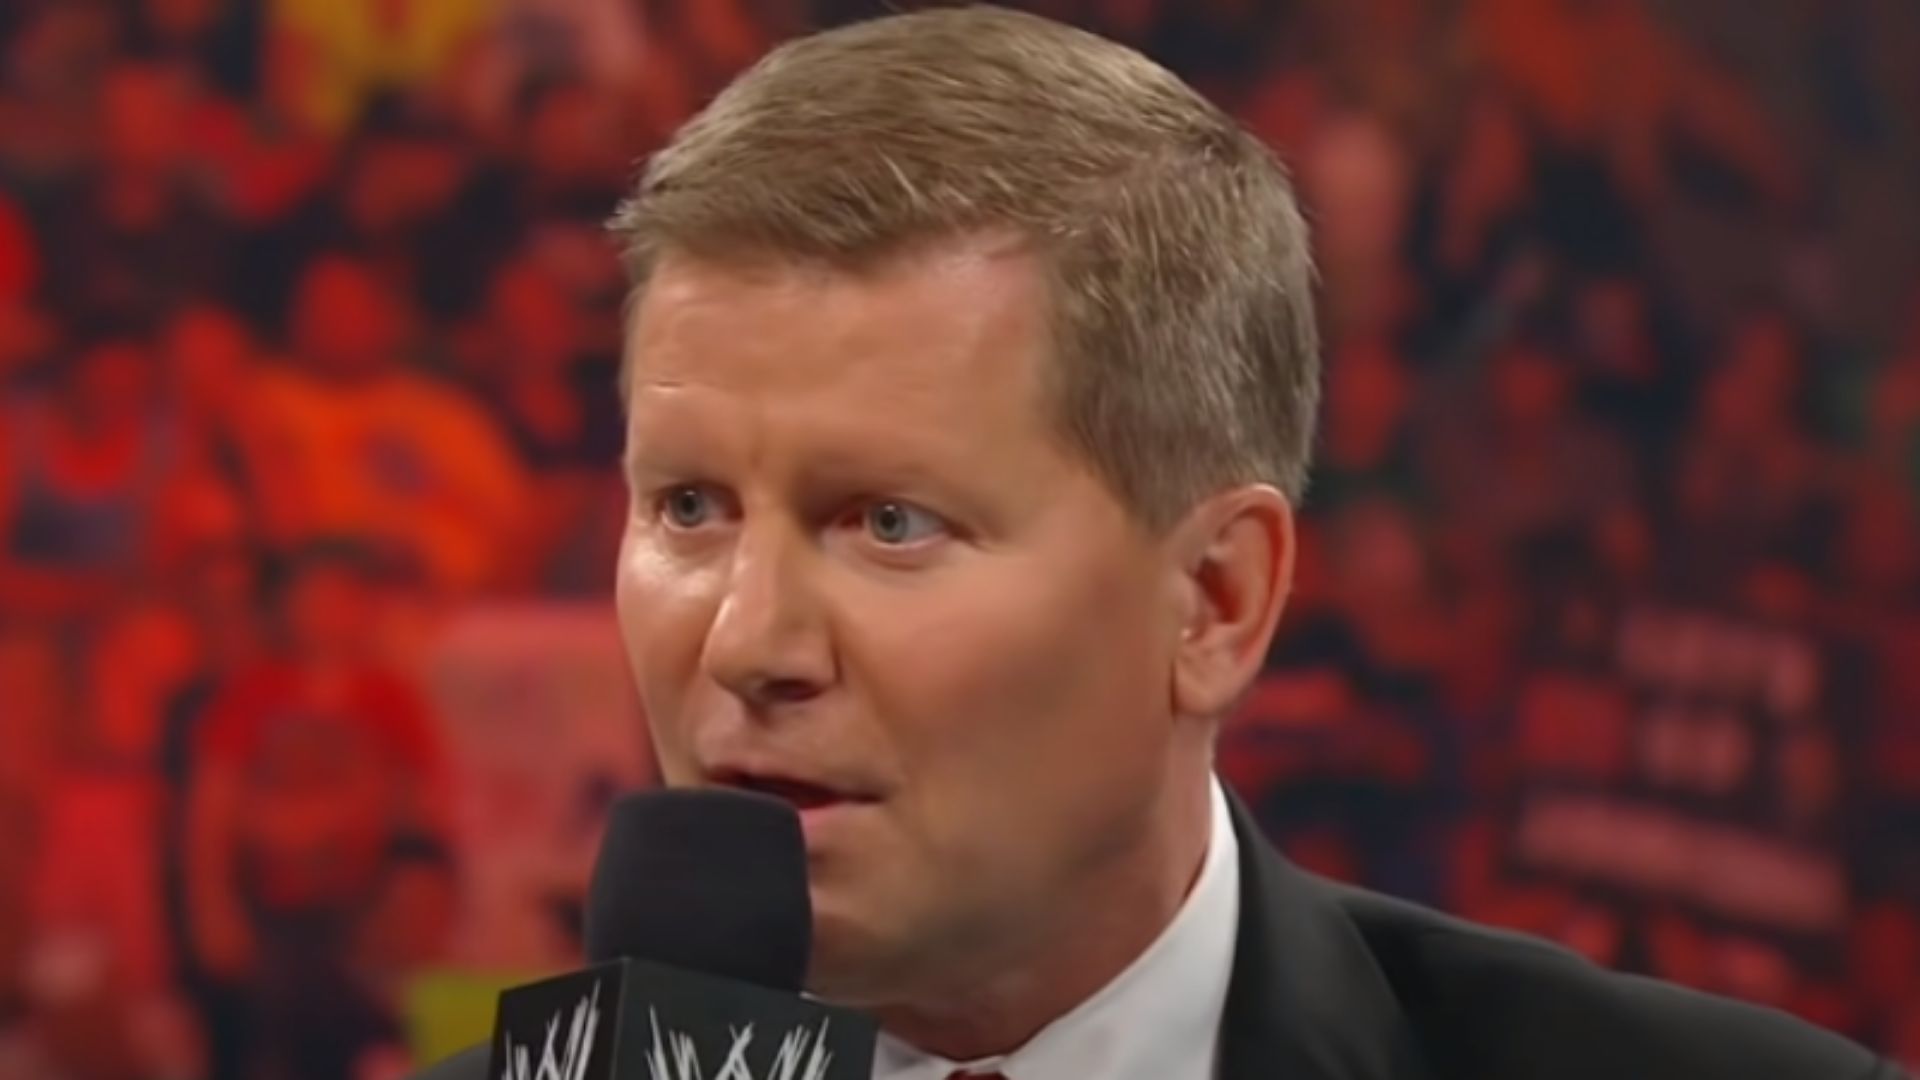 John Laurinaitis is partly responsible for hiring and firing superstars